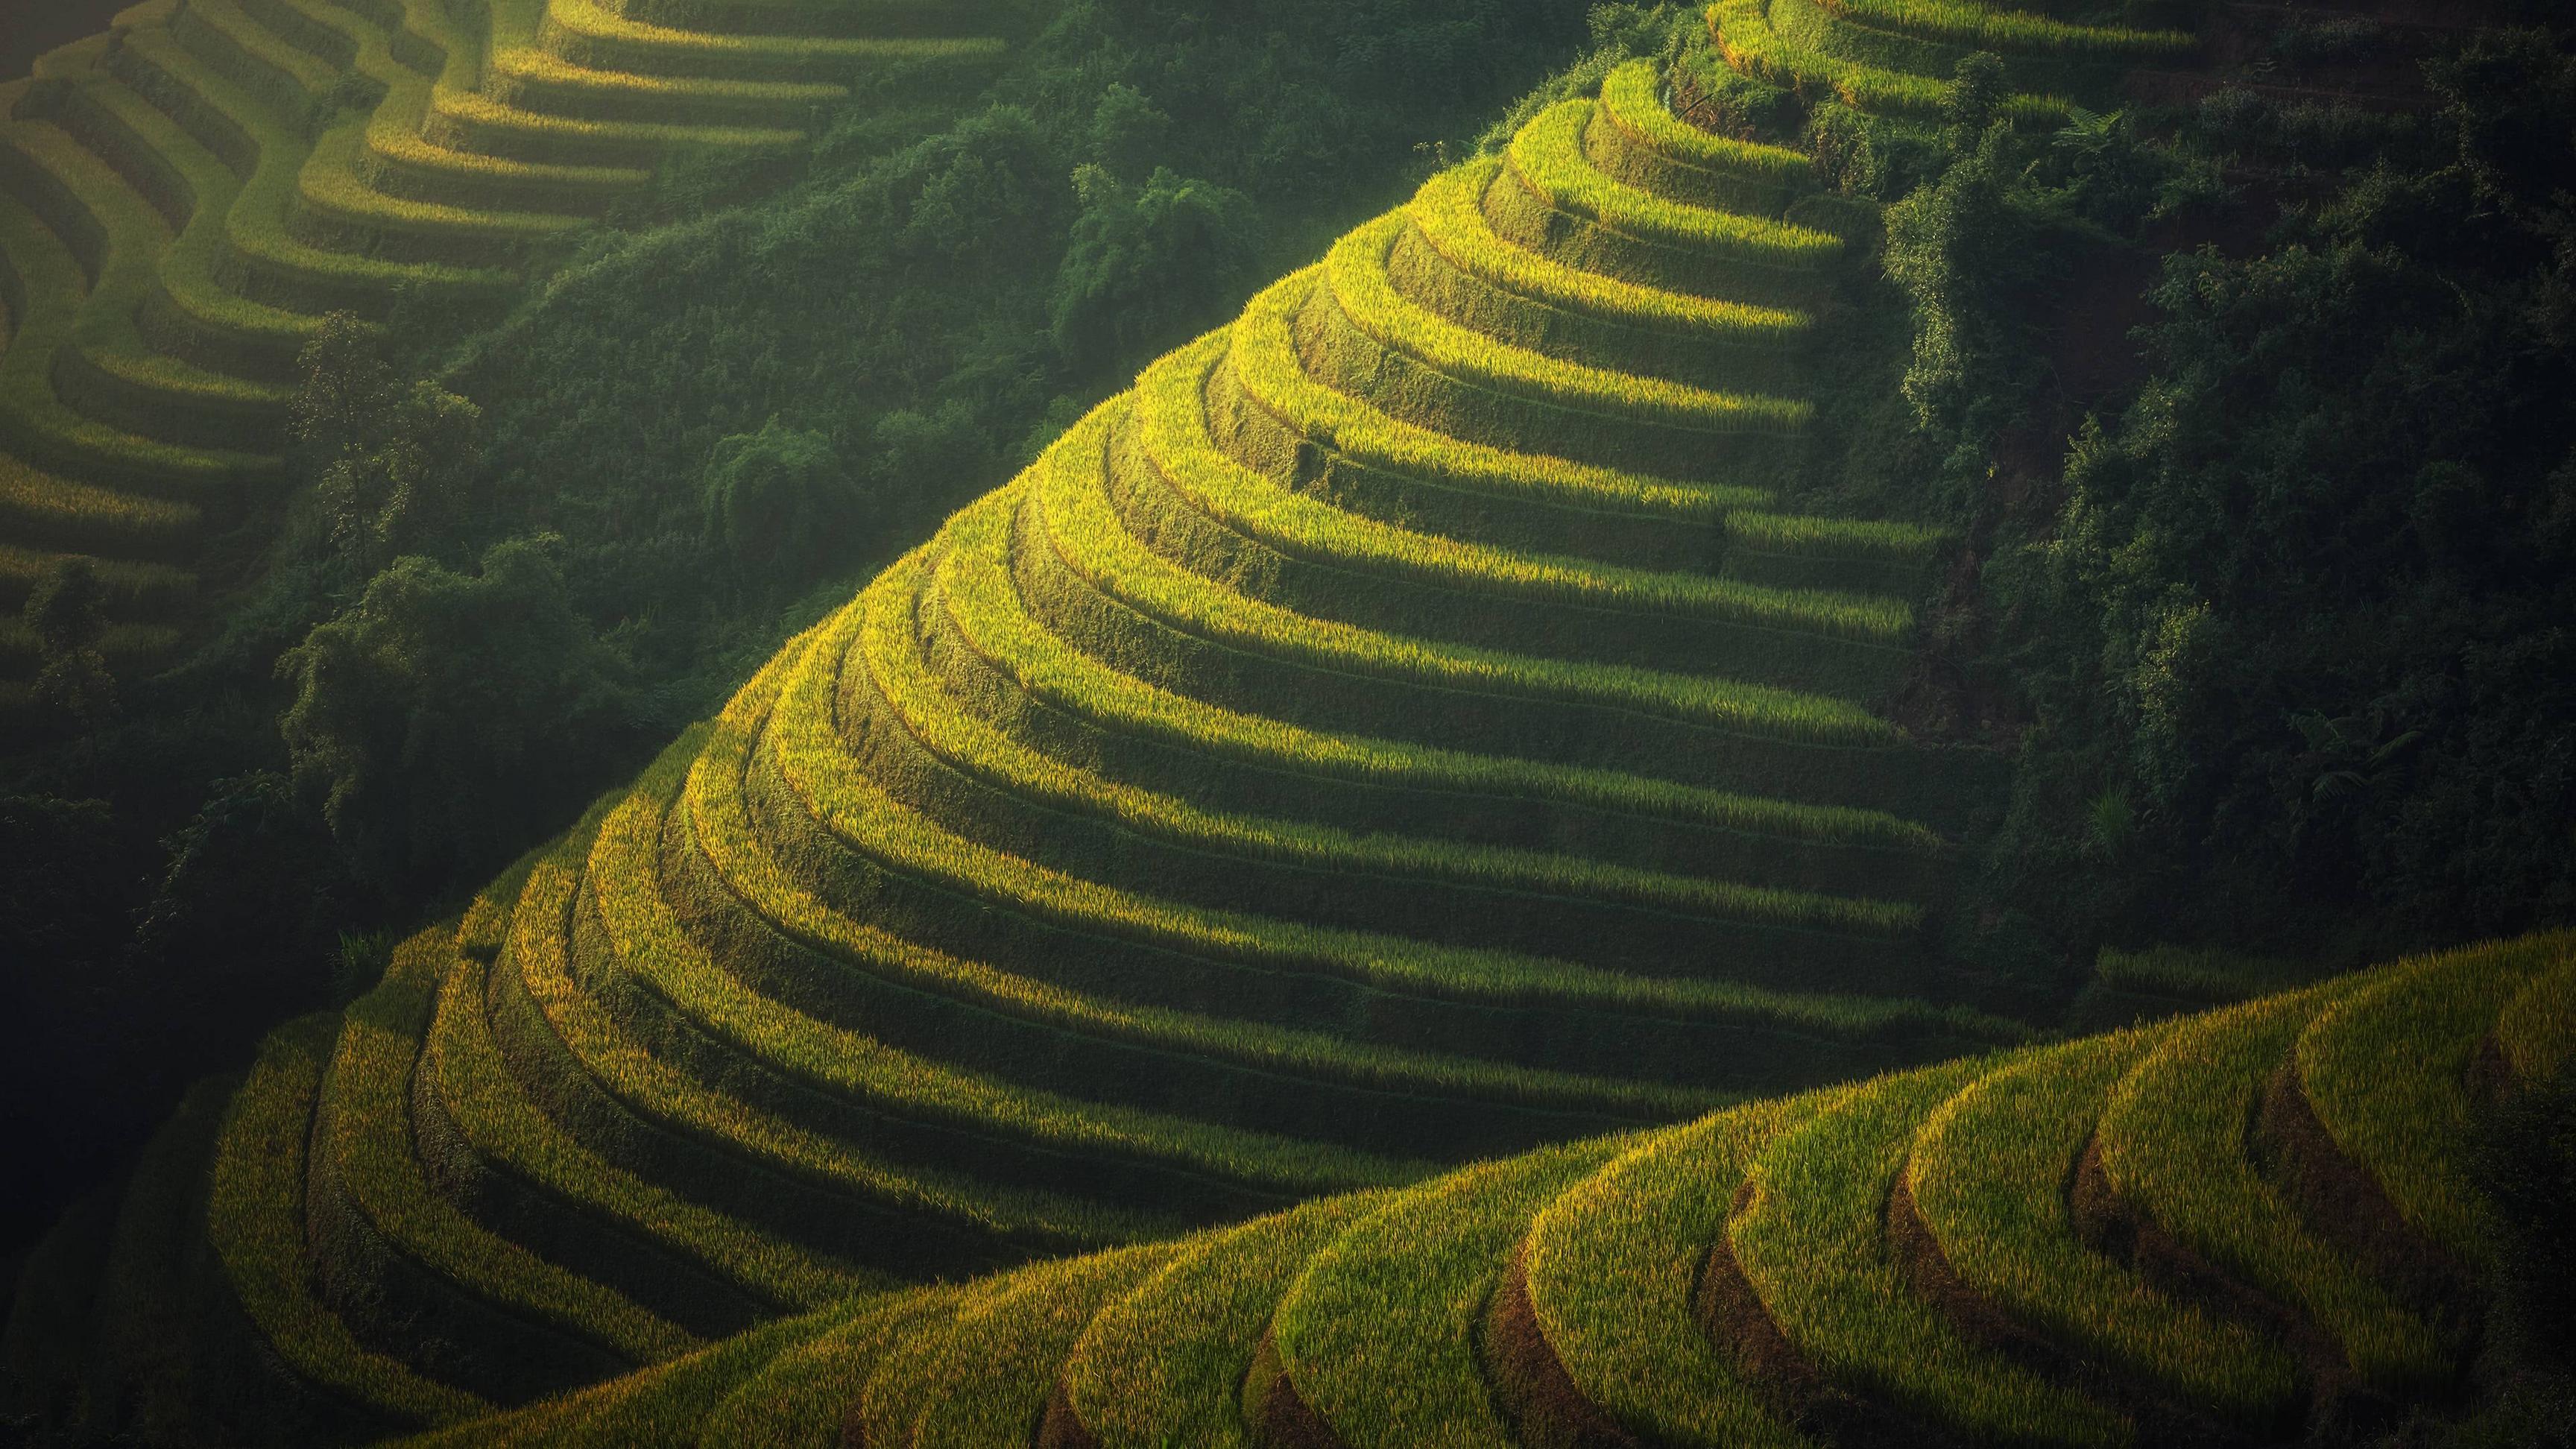 Rice Terrace Wallpapers